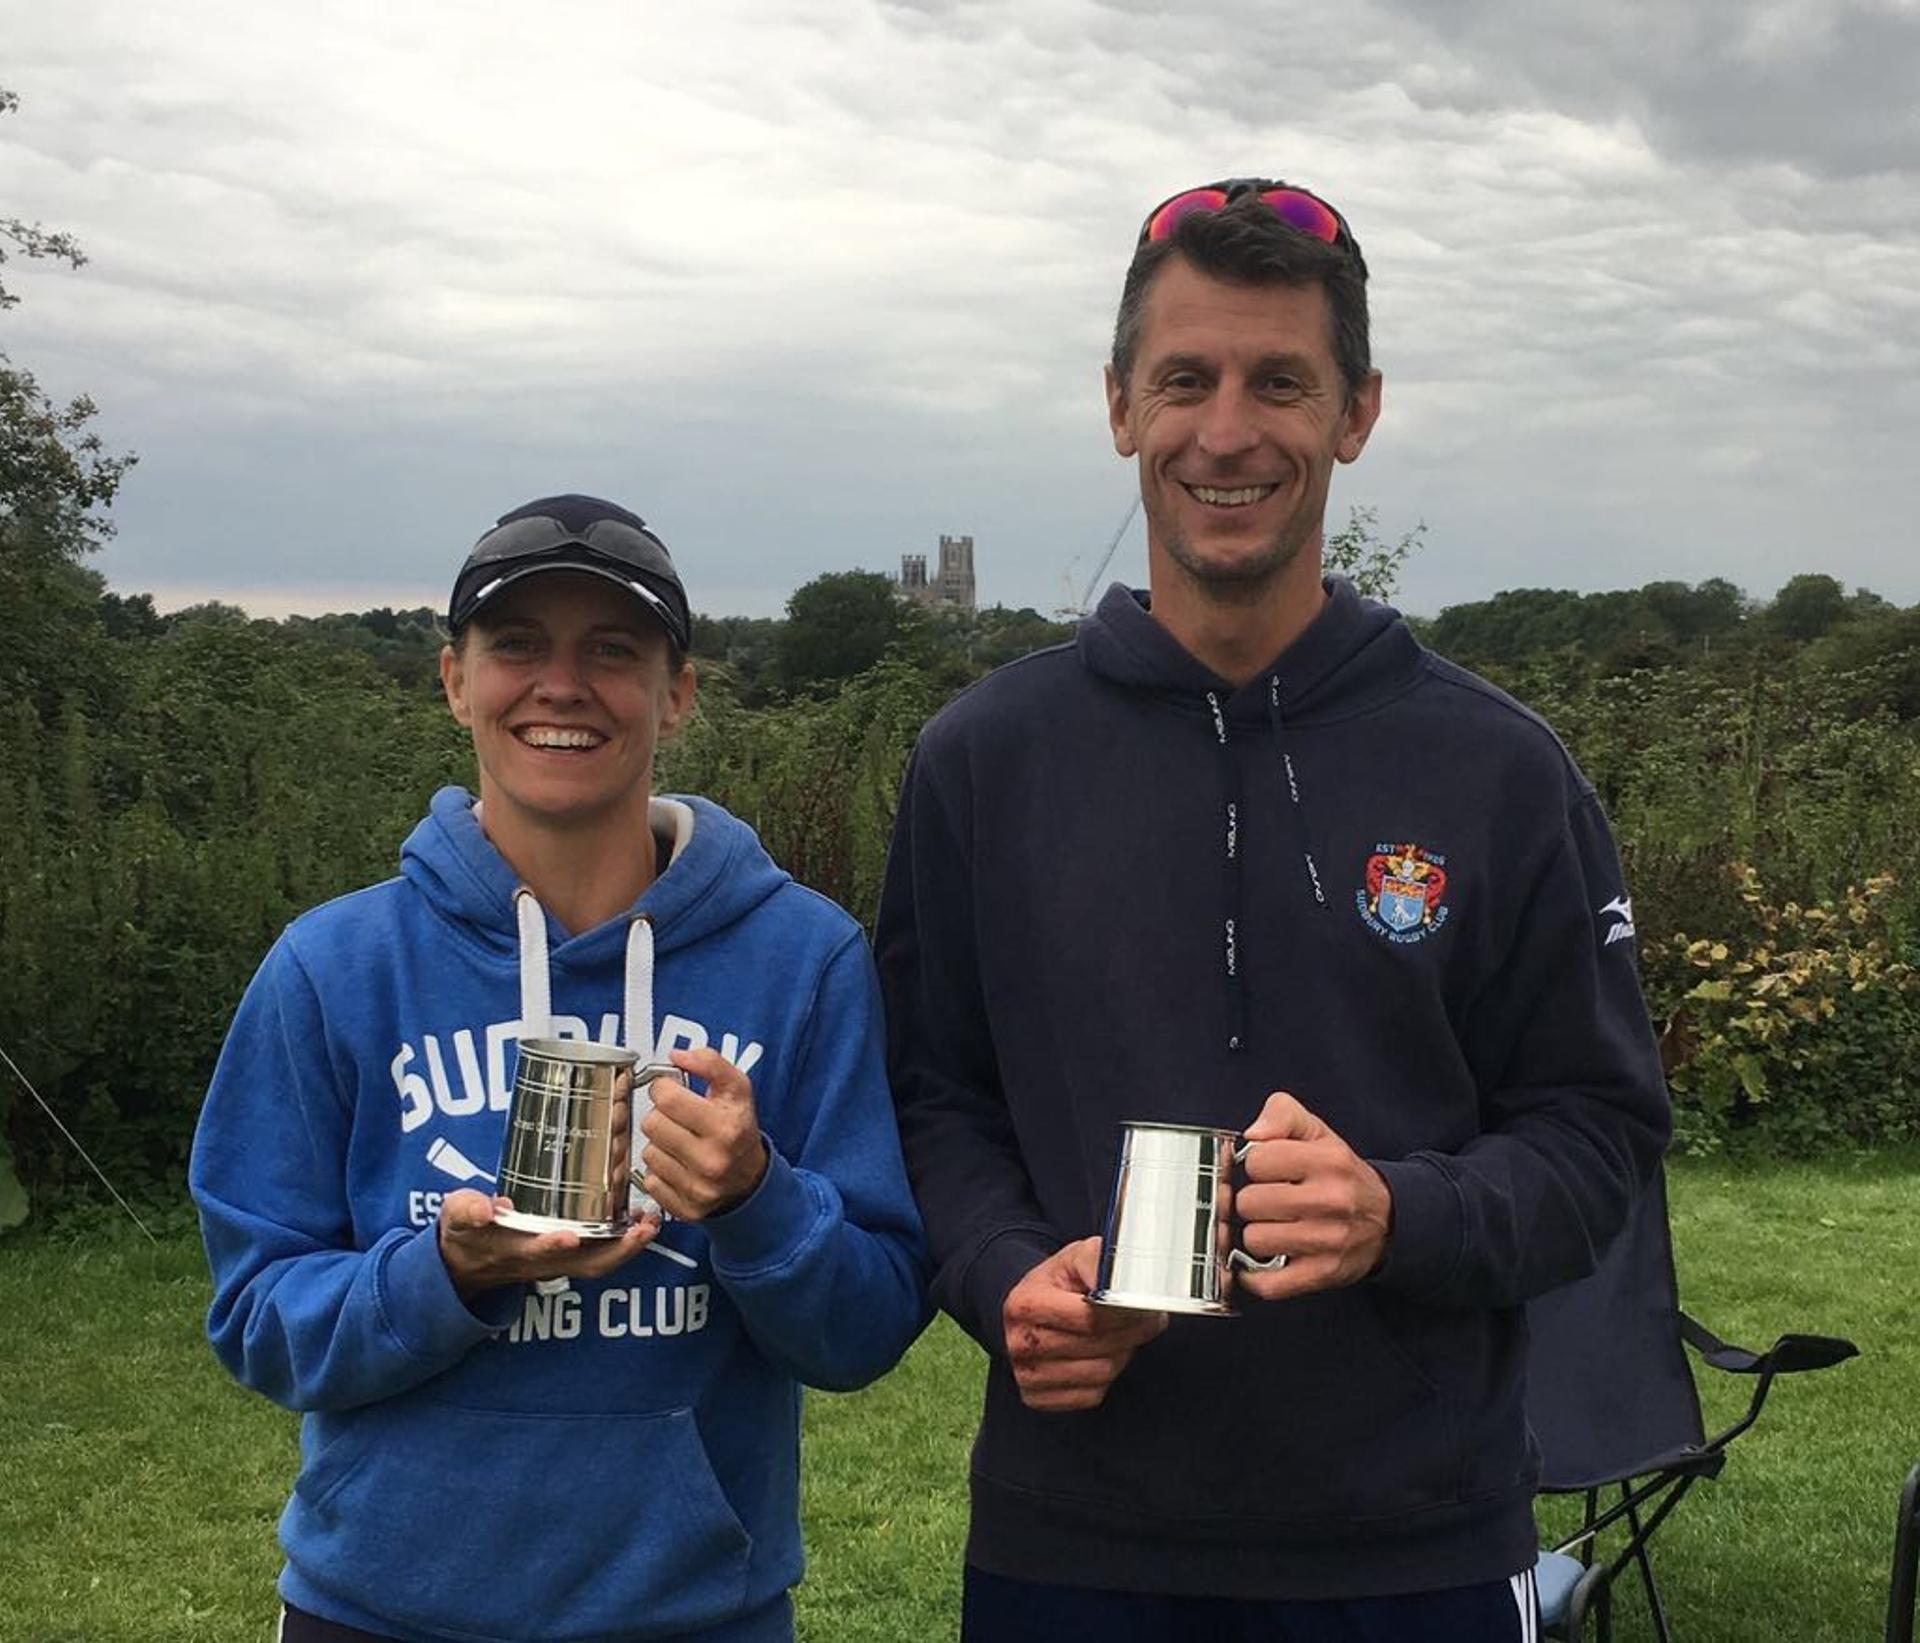 Two Sudbury rowers holding their pots (after winning a rowing marathon) with some sort of significant Lincolnshire ecclesiastical building in the distance in the far 